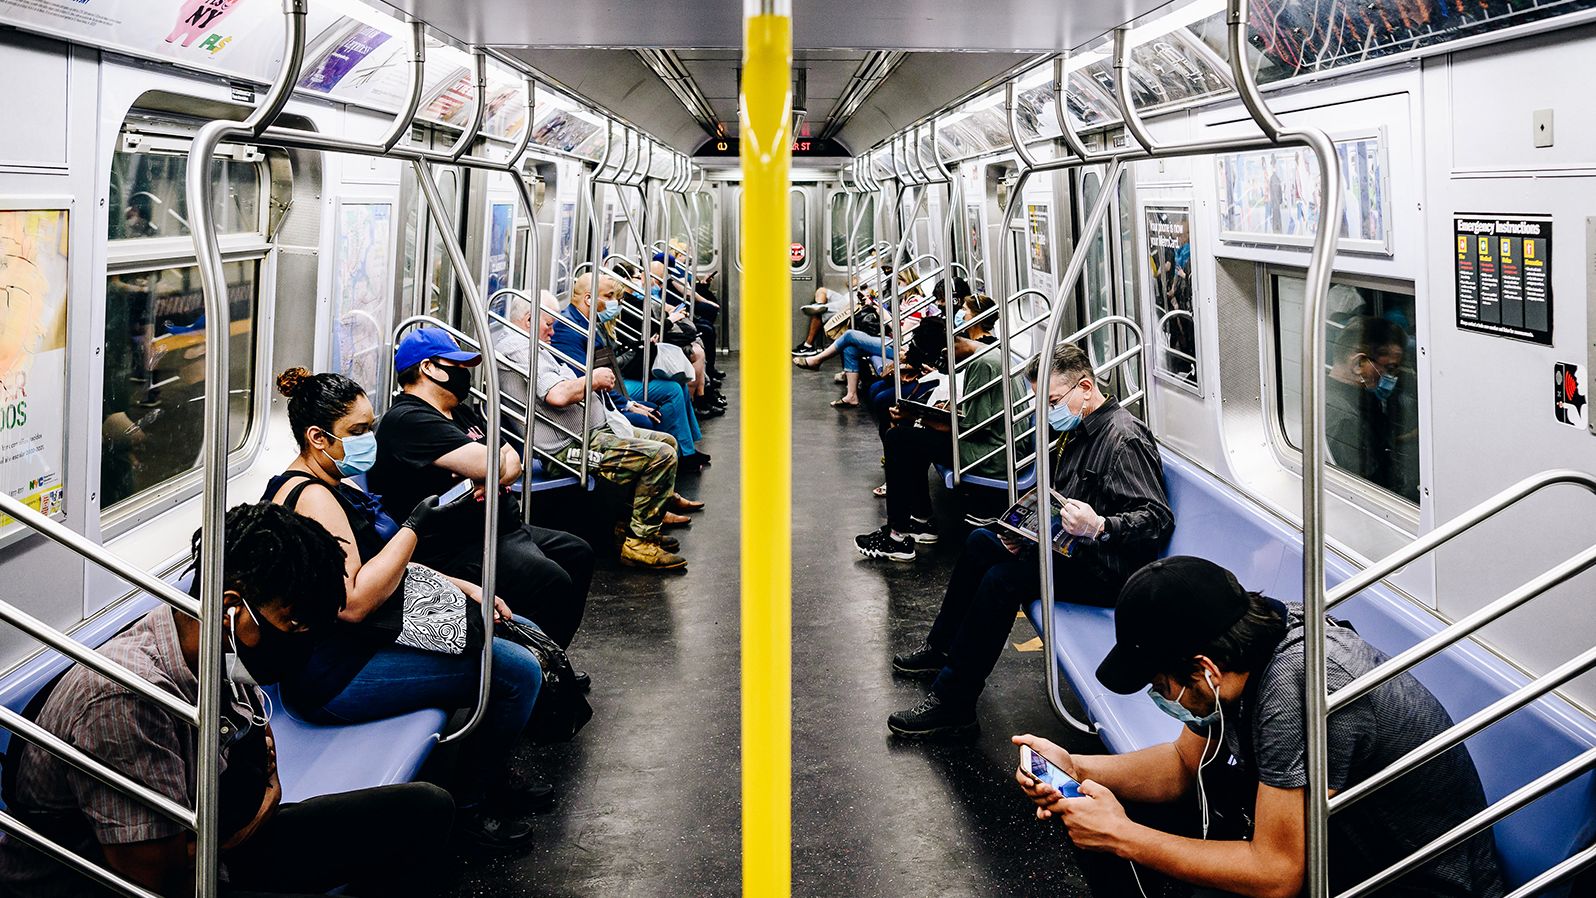 Commuters wear protective masks as they ride a subway train in New York on June 8.